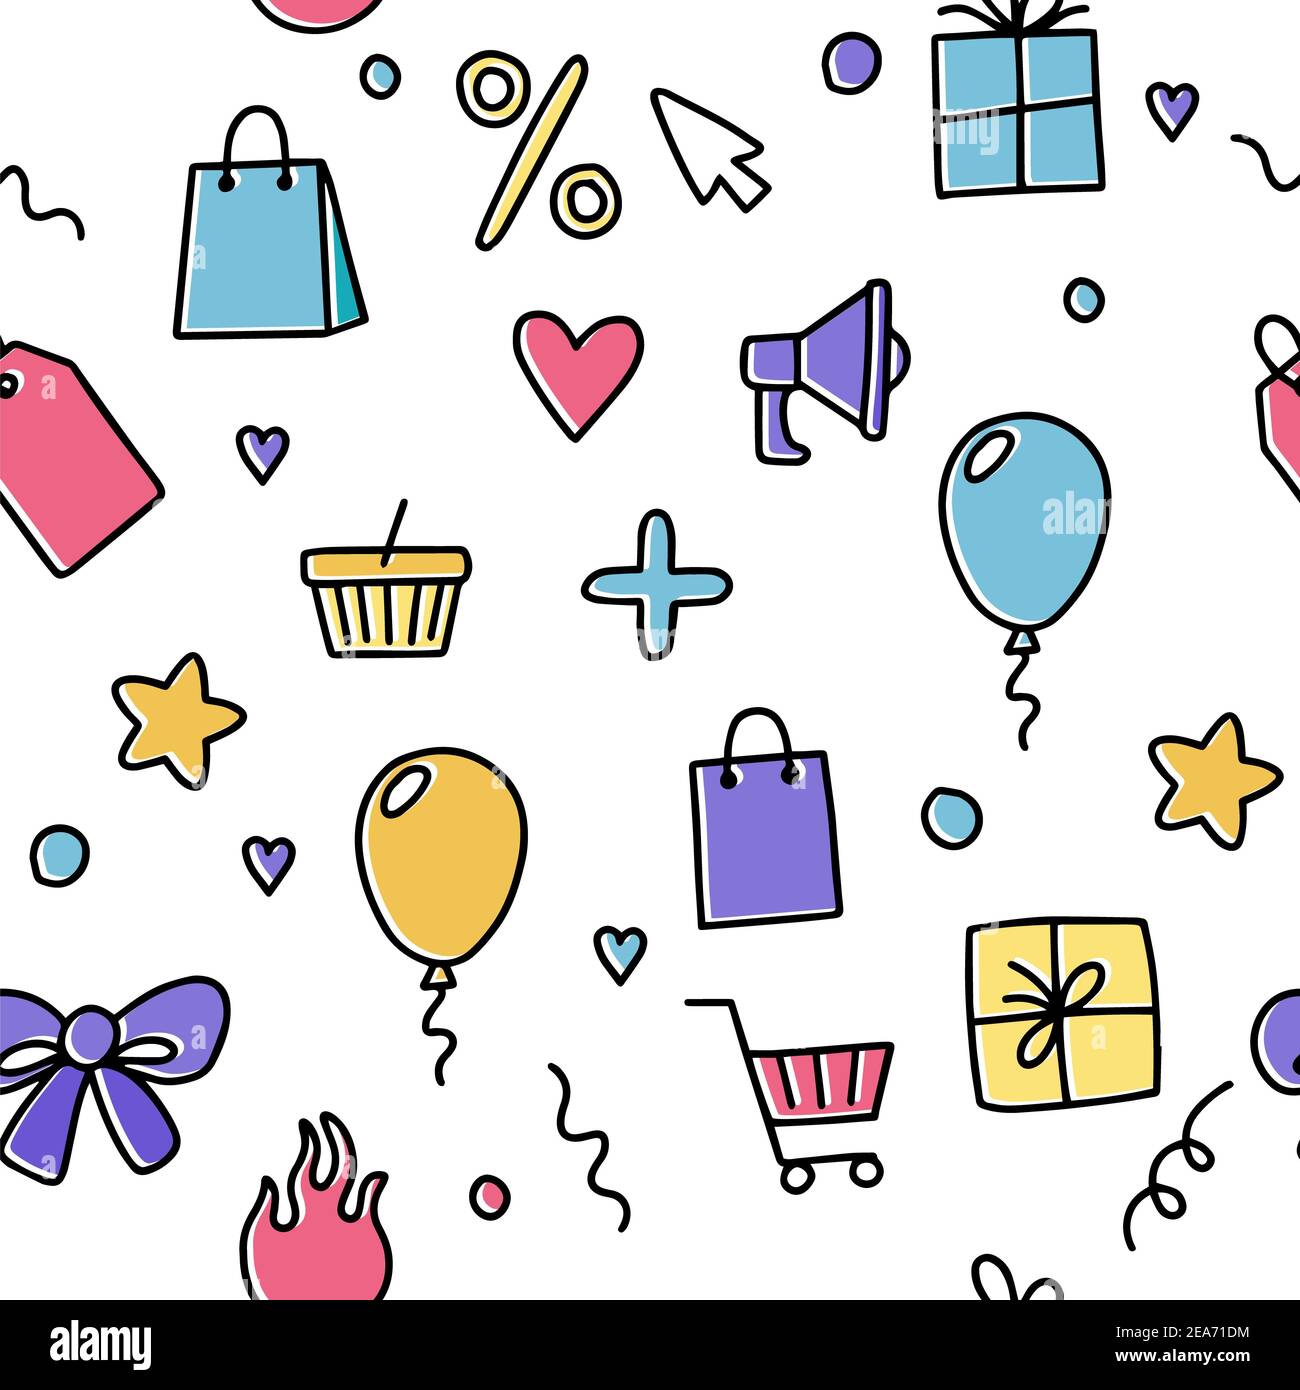 Black friday seamless pattern with doodle illustration Stock Photo